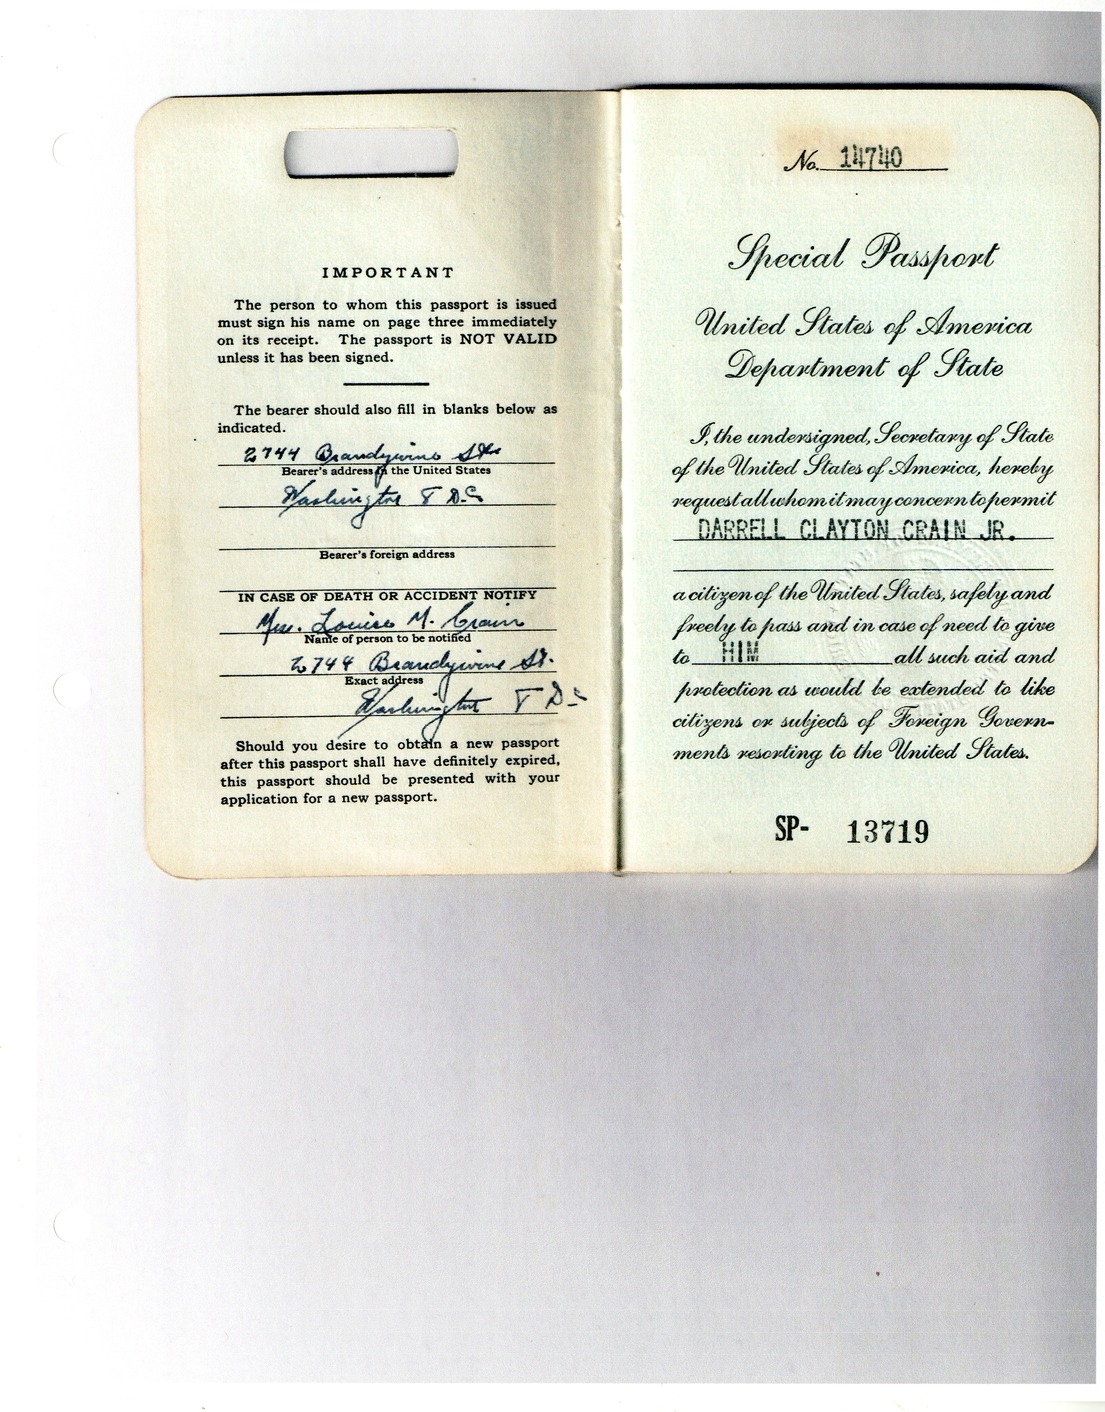 Special United States Passport for Dr. Darrell Crain